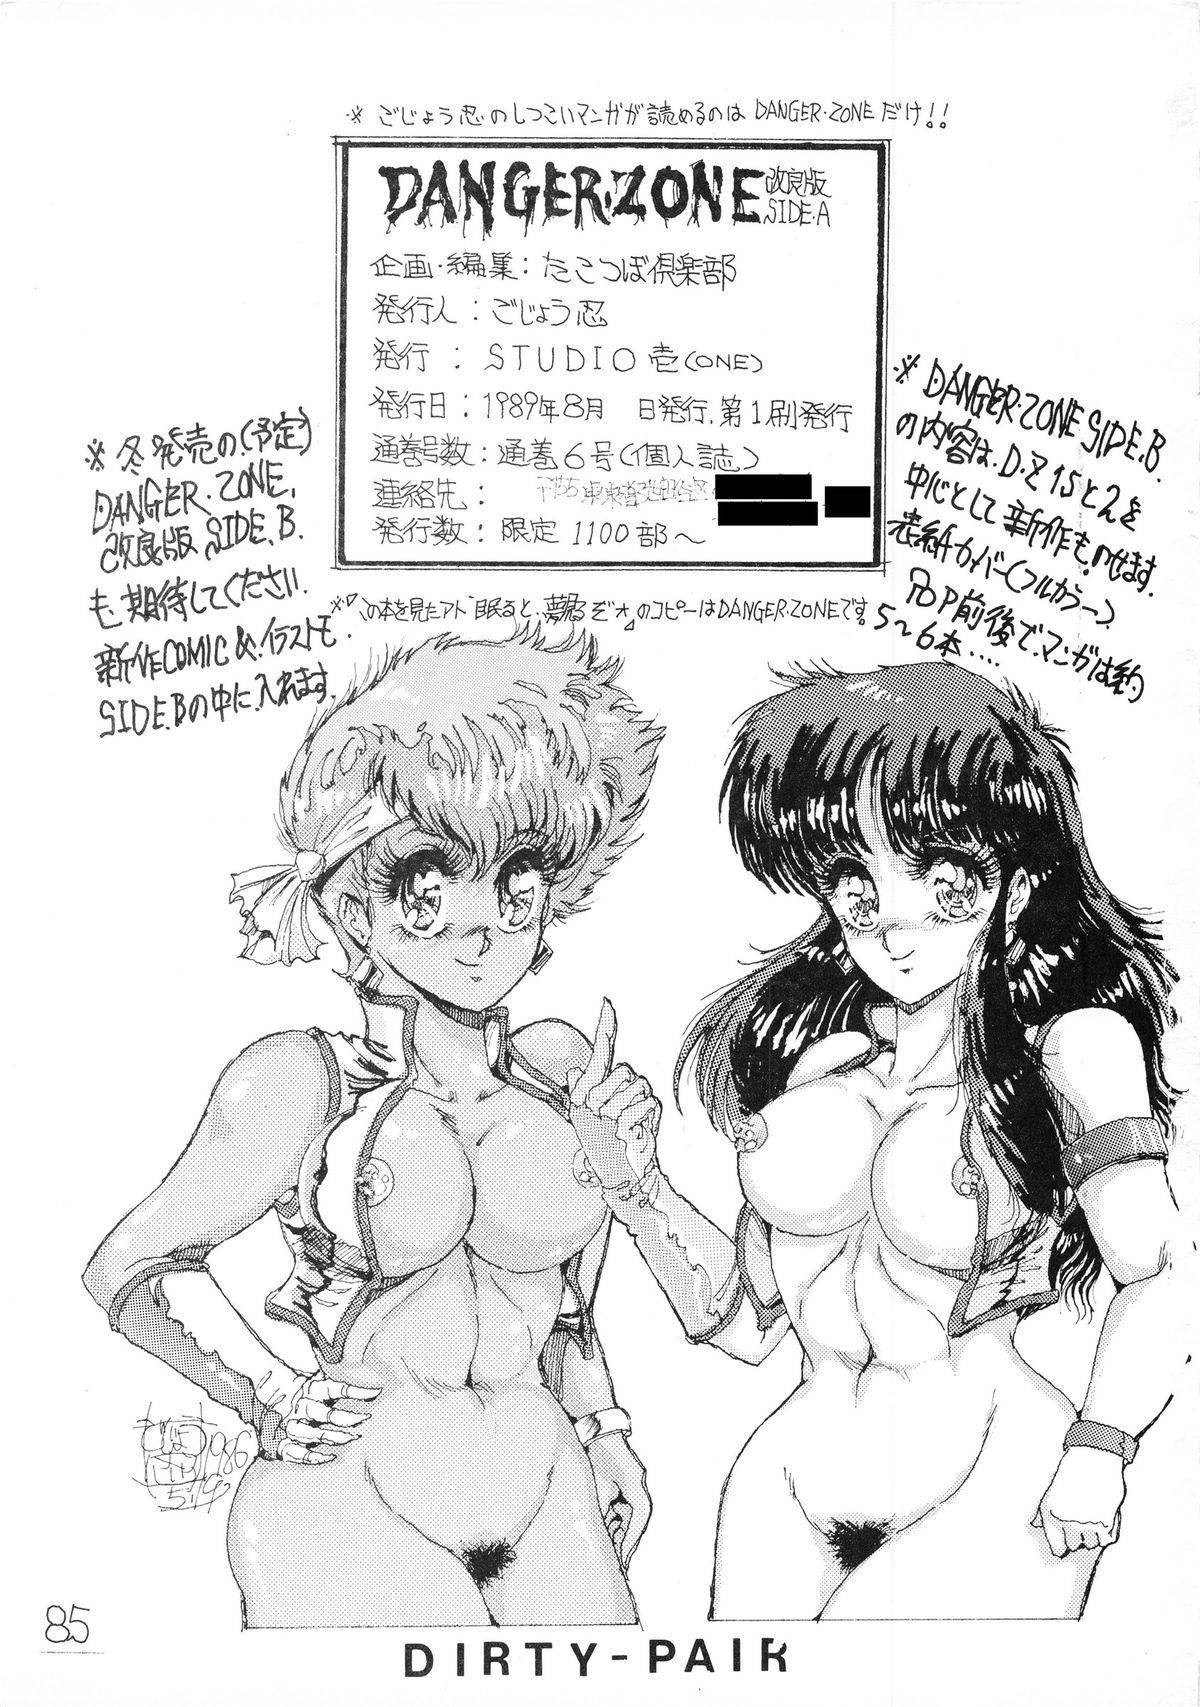 Tight Pussy DANGER ZONE improved version SIDE A - Dirty pair Maison ikkoku Magical emi Kimagure orange road Macho - Page 87